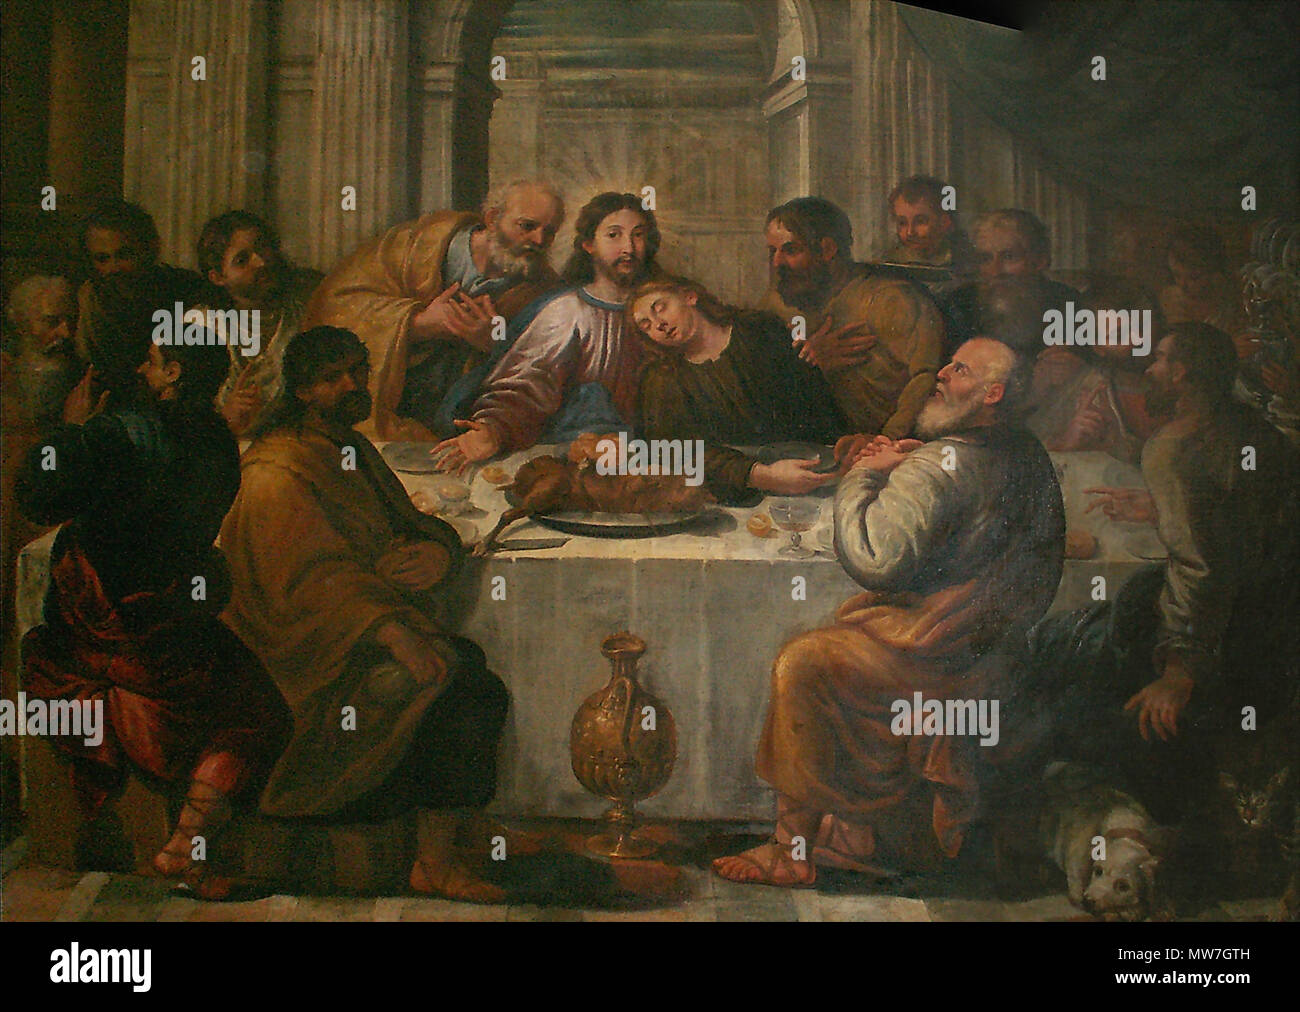 . English: The Last Supper by Palma il Vecchio, National Gallery for Foreign Art, Sofia, Bulgaria . 20 May 2006. Edal Anton Lefterov 602 TheLastSupperPalmaVecchio Stock Photo